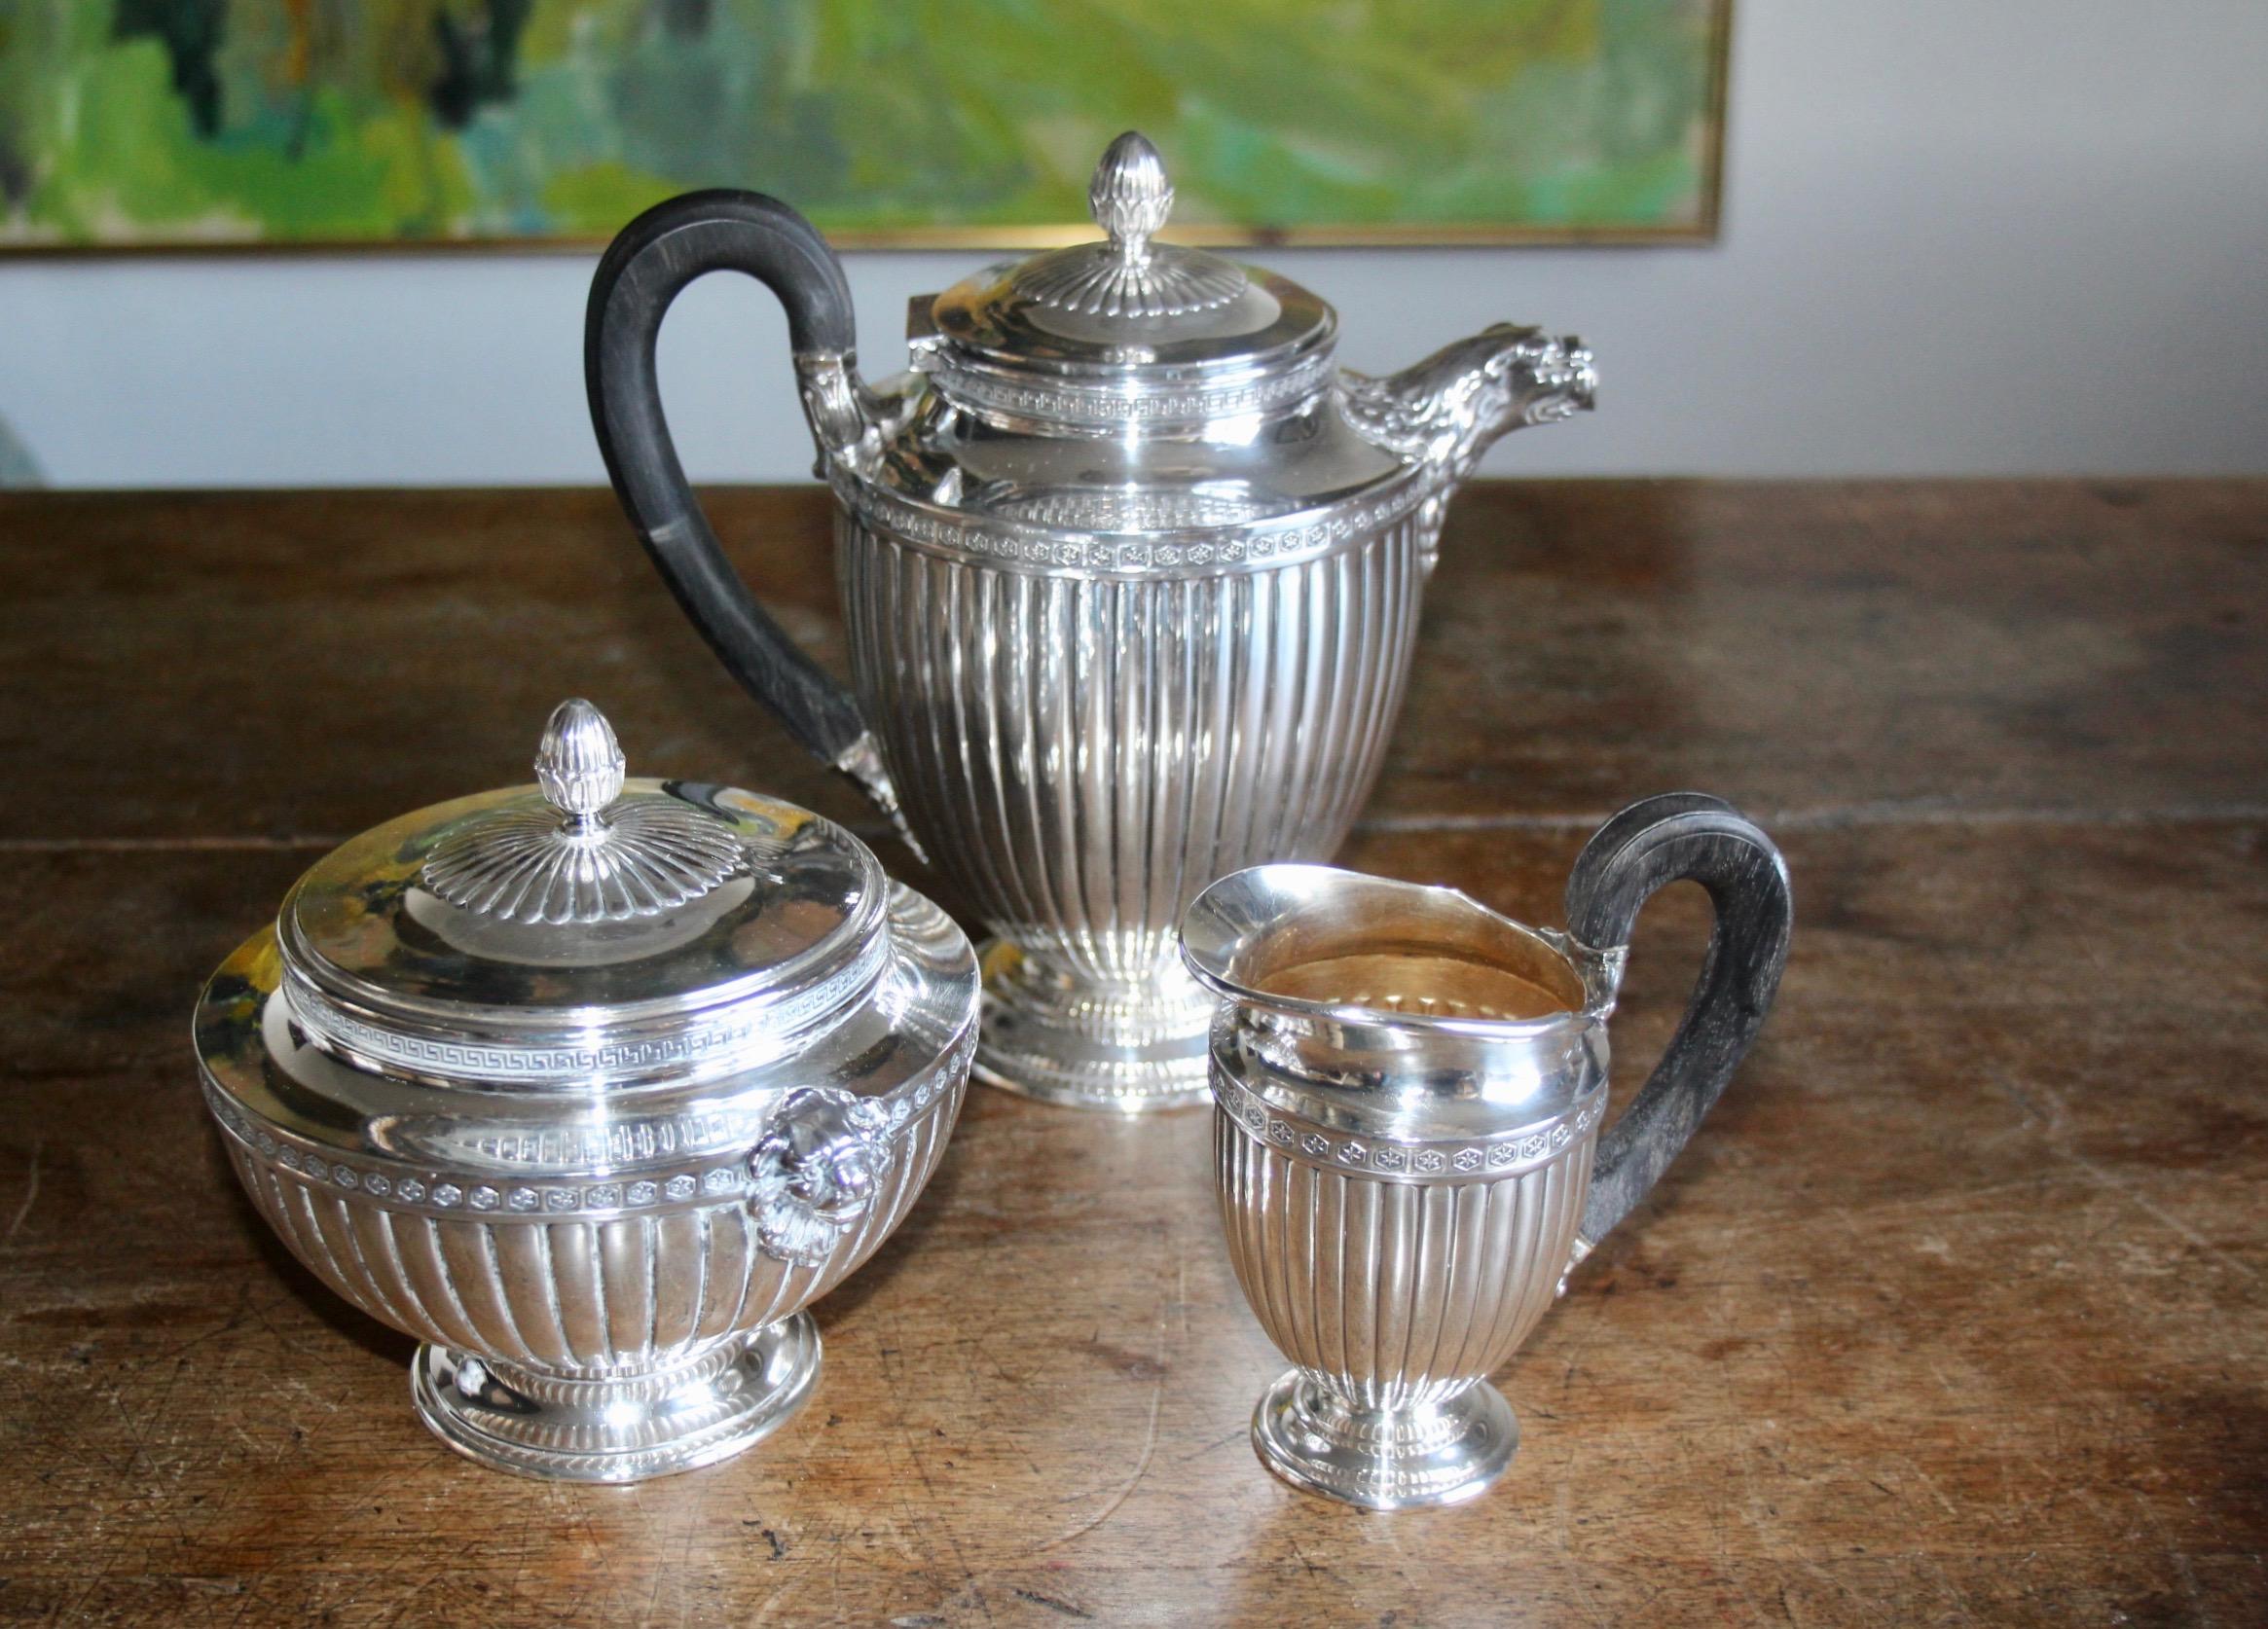 A timeless set for tea and coffee in neoclassical form in silver with wood handle, from the maker Puiforcat Paris, these are a beautiful and timeless set for tea and coffee, consisting of a tea pot, creamer and sugar bowl. Fully hallmarked and also